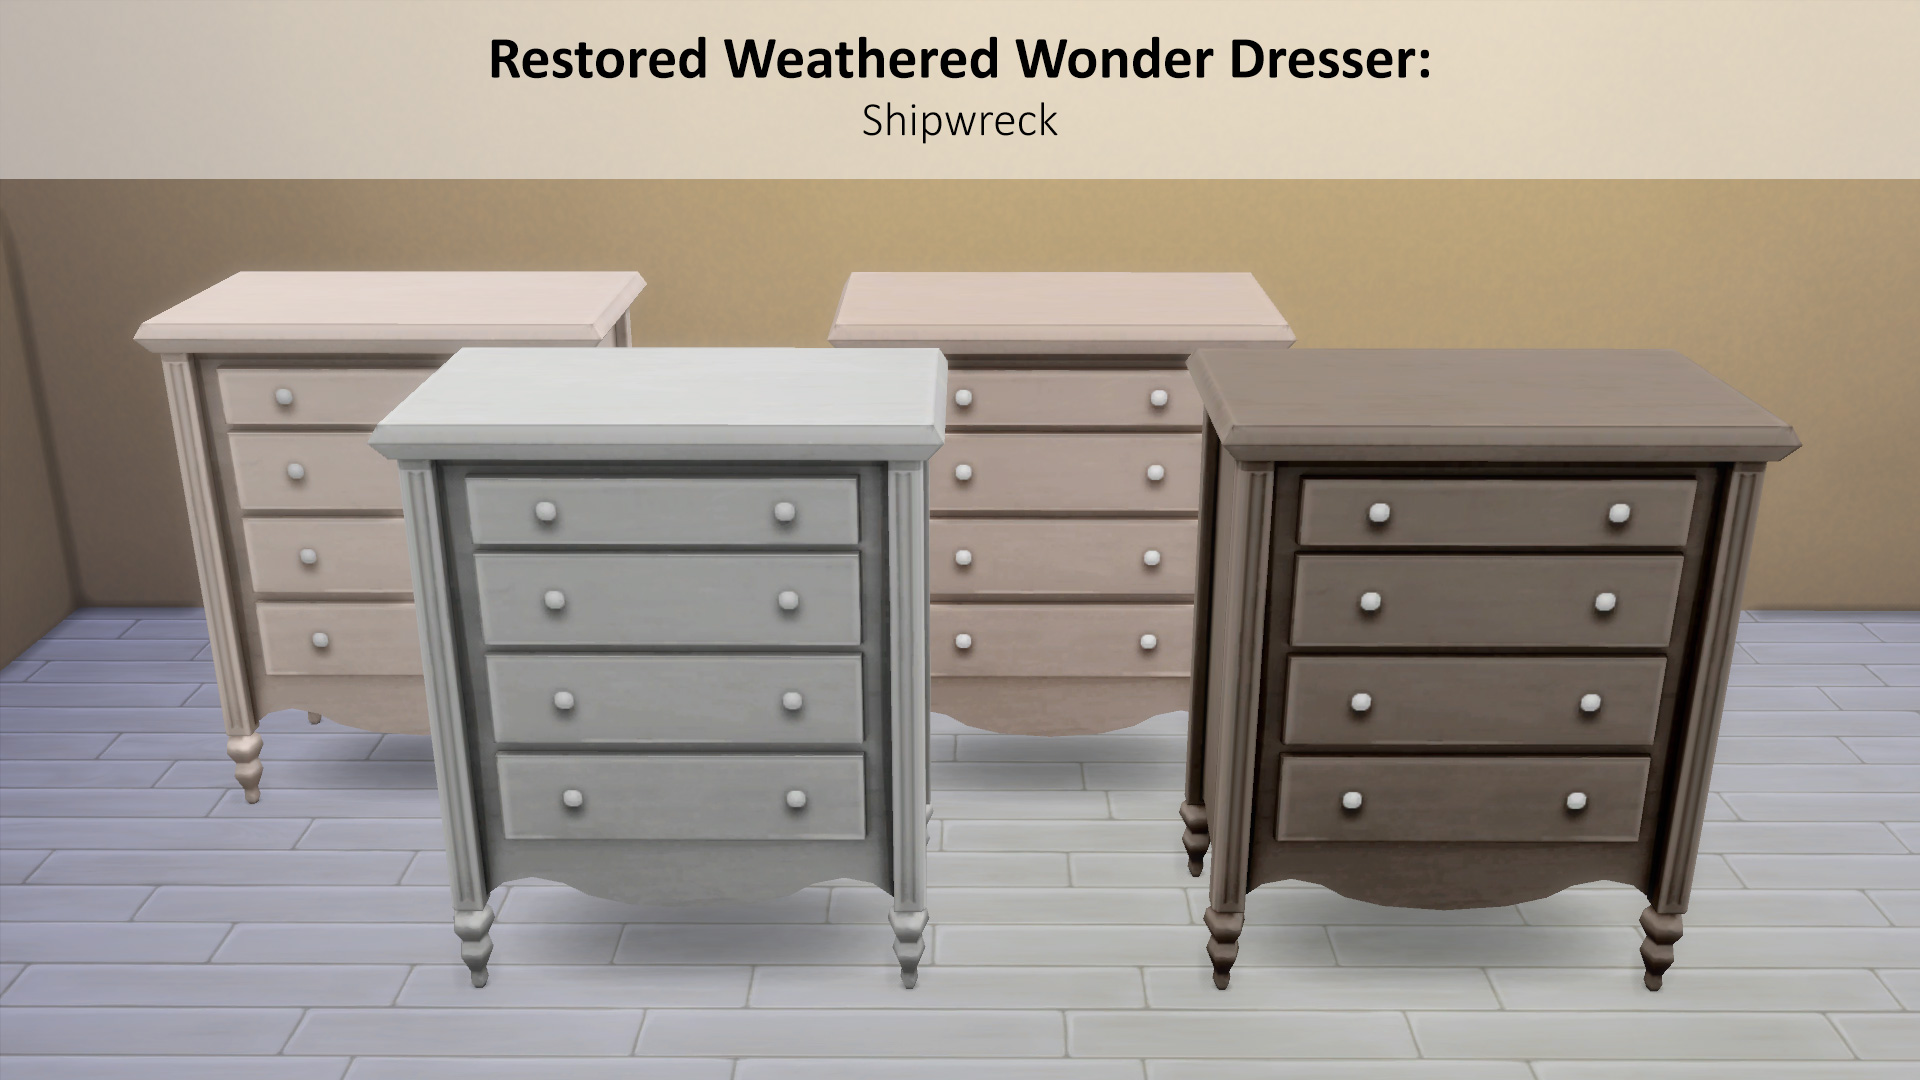 Mod The Sims Restored Weathered Wonder Dresser In Shipwreck